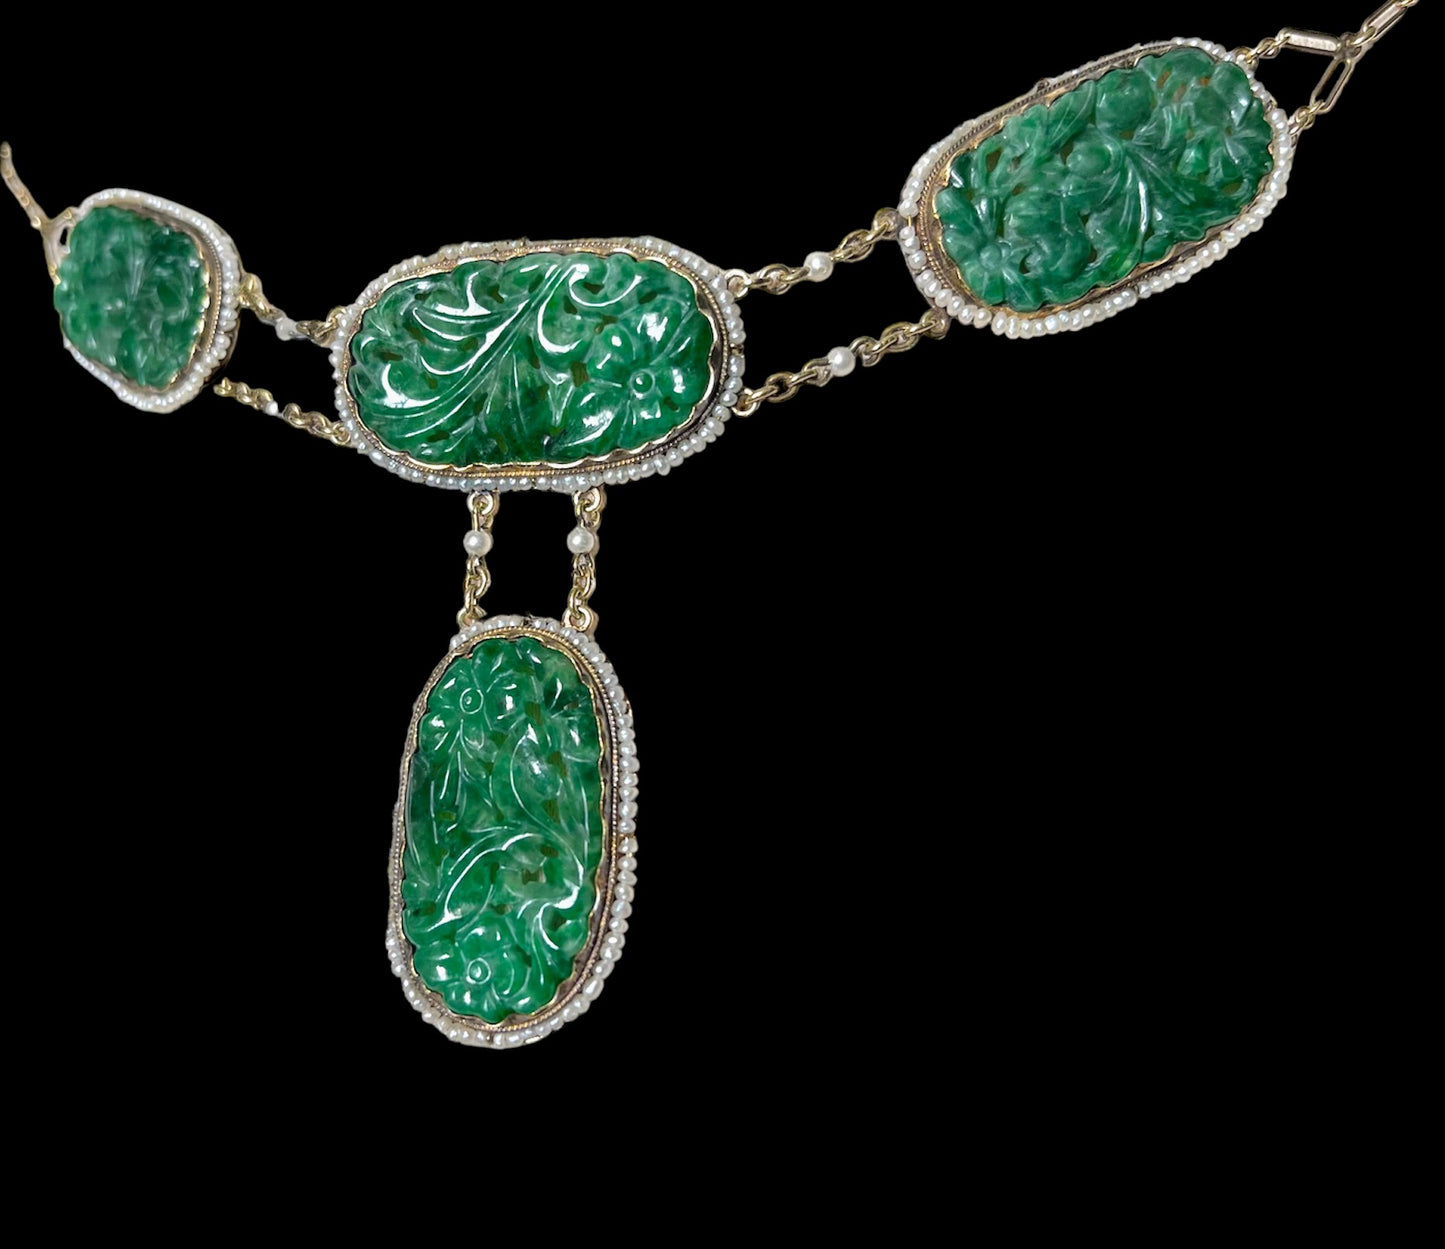 A jade and pearl necklace in 14kt gold setting